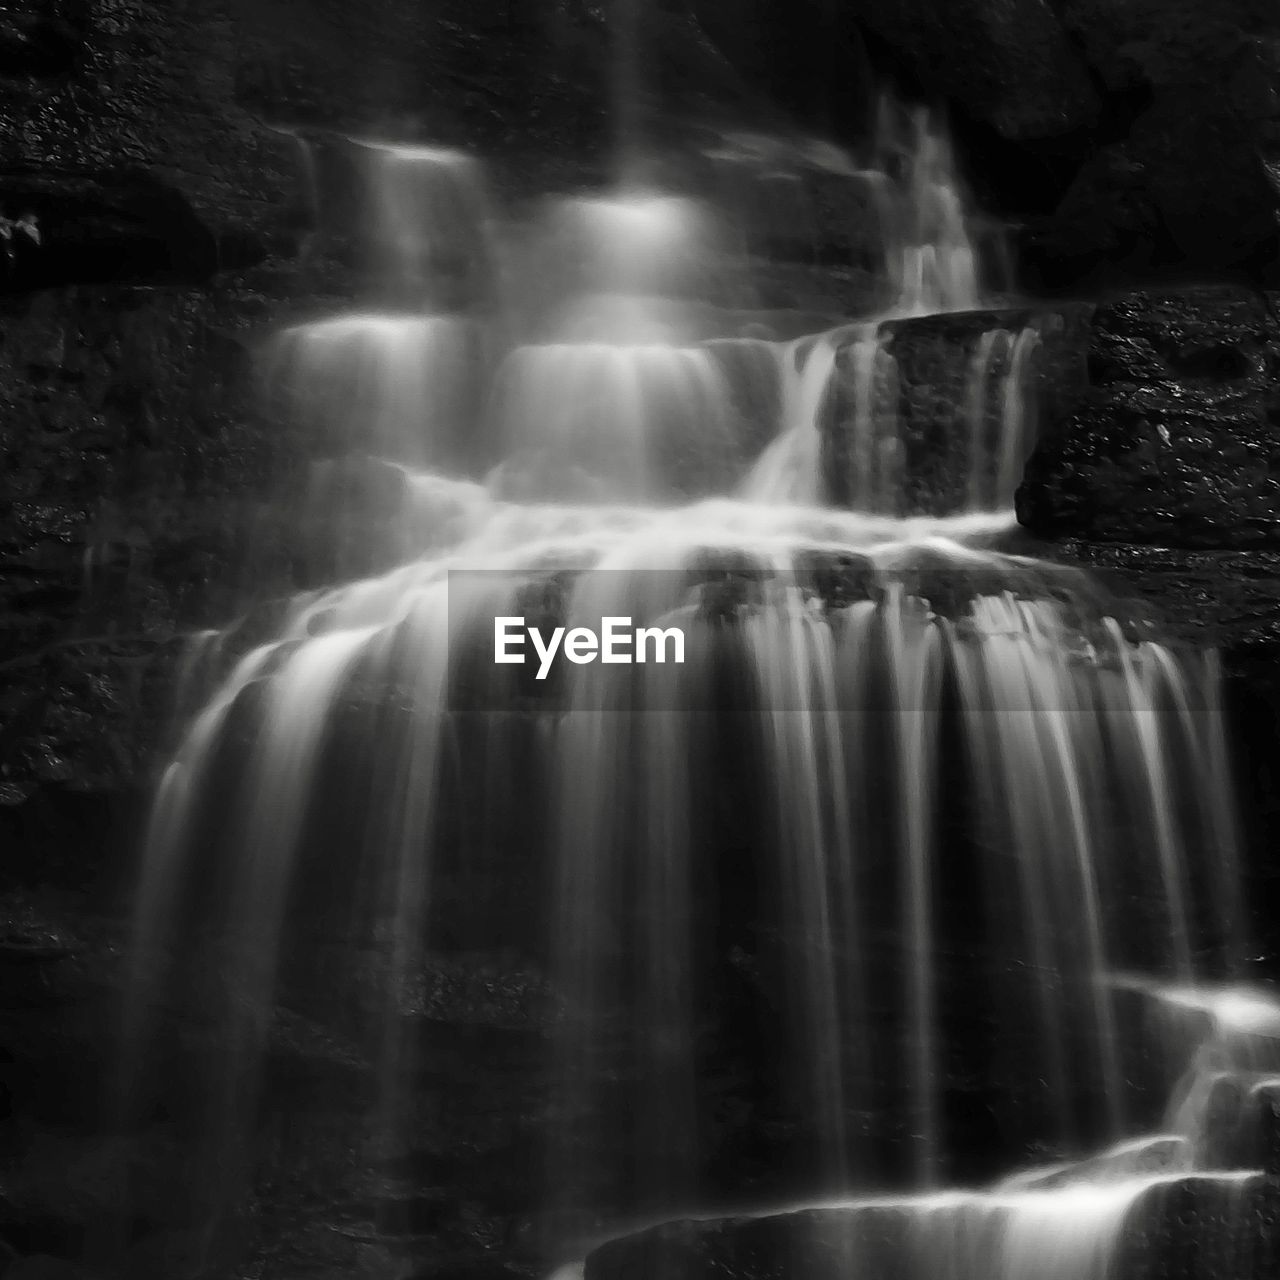 waterfall, water, scenics - nature, motion, long exposure, water feature, beauty in nature, black and white, monochrome photography, nature, darkness, blurred motion, monochrome, rock, environment, flowing, no people, flowing water, land, body of water, travel destinations, outdoors, forest, rock formation